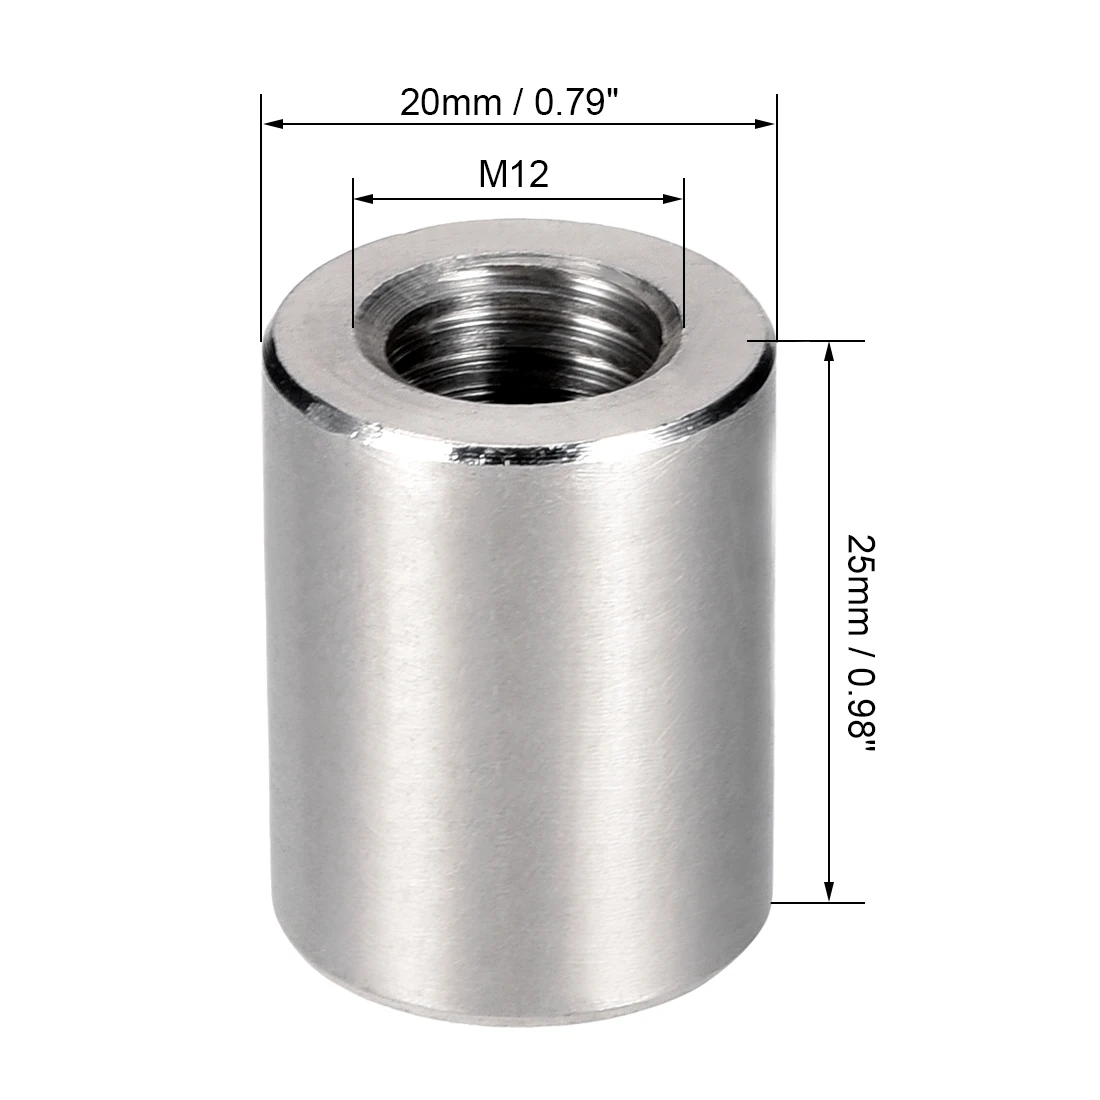 DealMux a16050300ux0565 Round Connector Nuts M4X0.7Mm Rose Joint Adapter Threaded Rod bar Stud Round Connector Nuts 10Pcs 